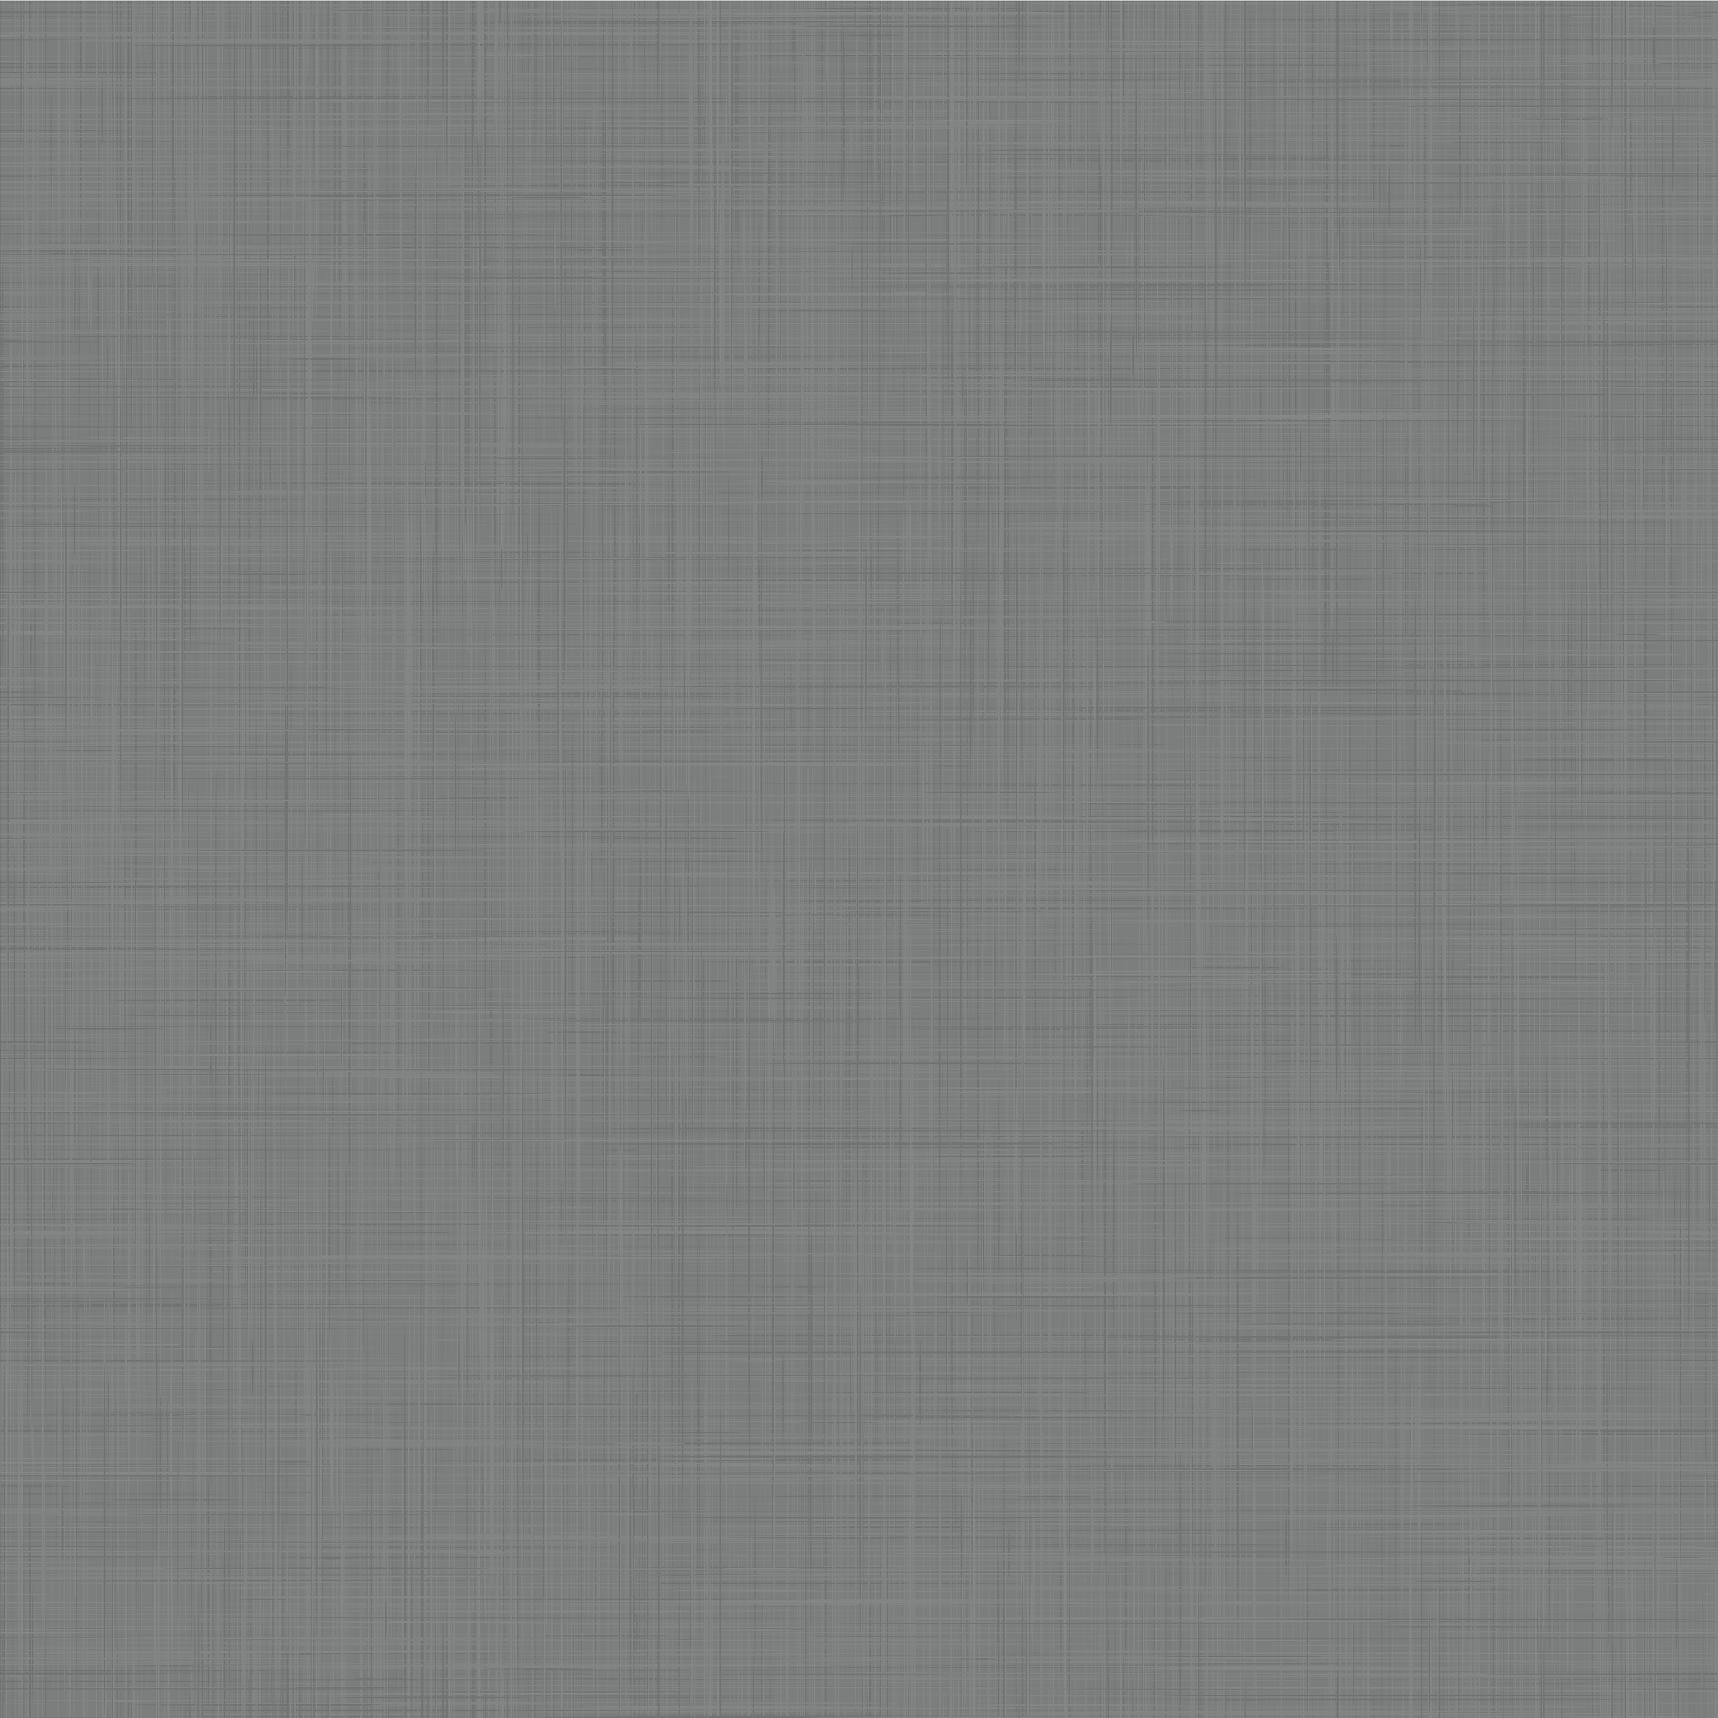 Charcoal grey grasscloth peel and stick removable wallpaper sample